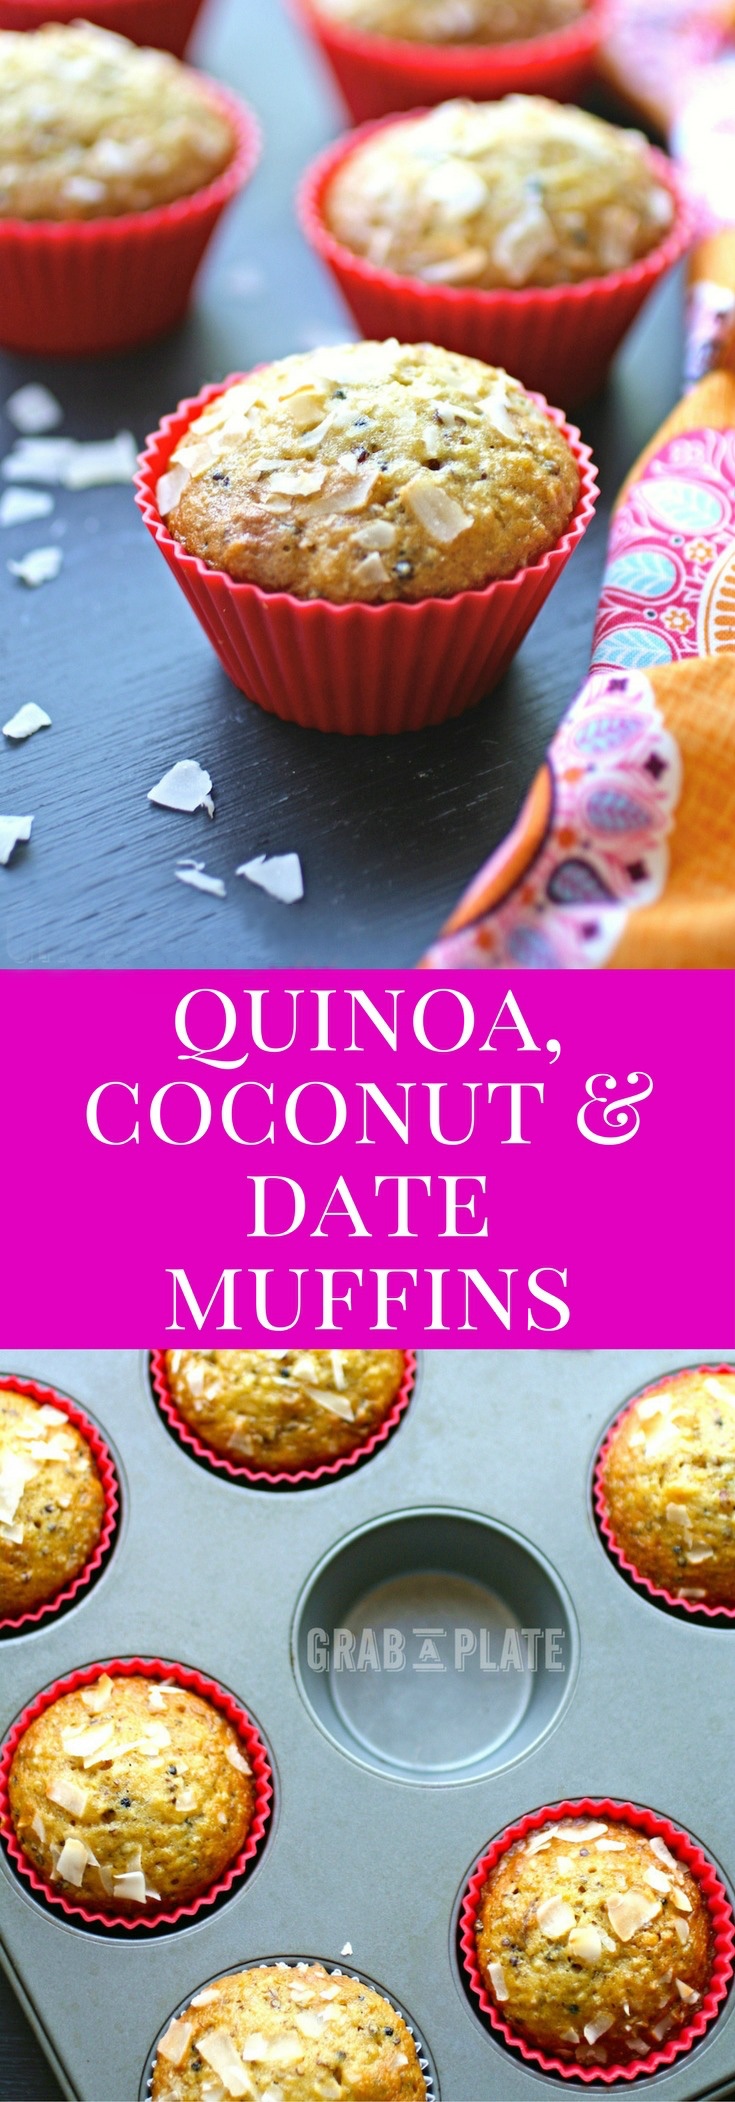 Quinoa, Coconut & Date Muffins are a tasty treat! Great for breakfast, or as a snack!